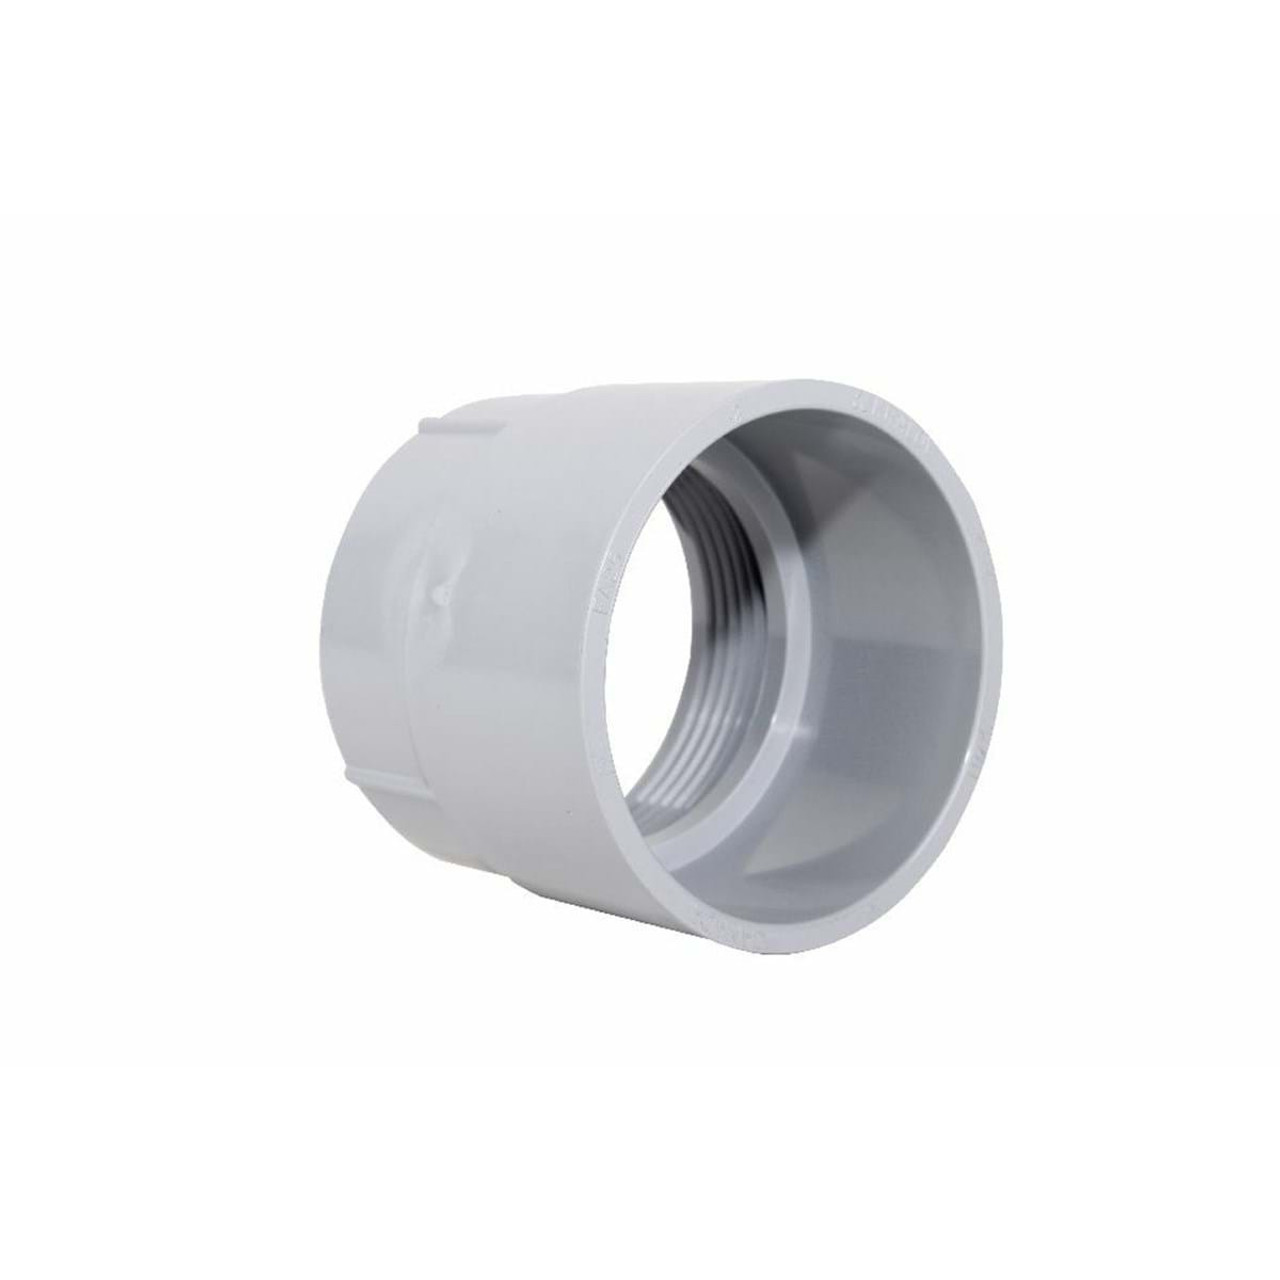 Kraloy FA25 Female Adapter Material: PVC Size: 2-1/2 Inch